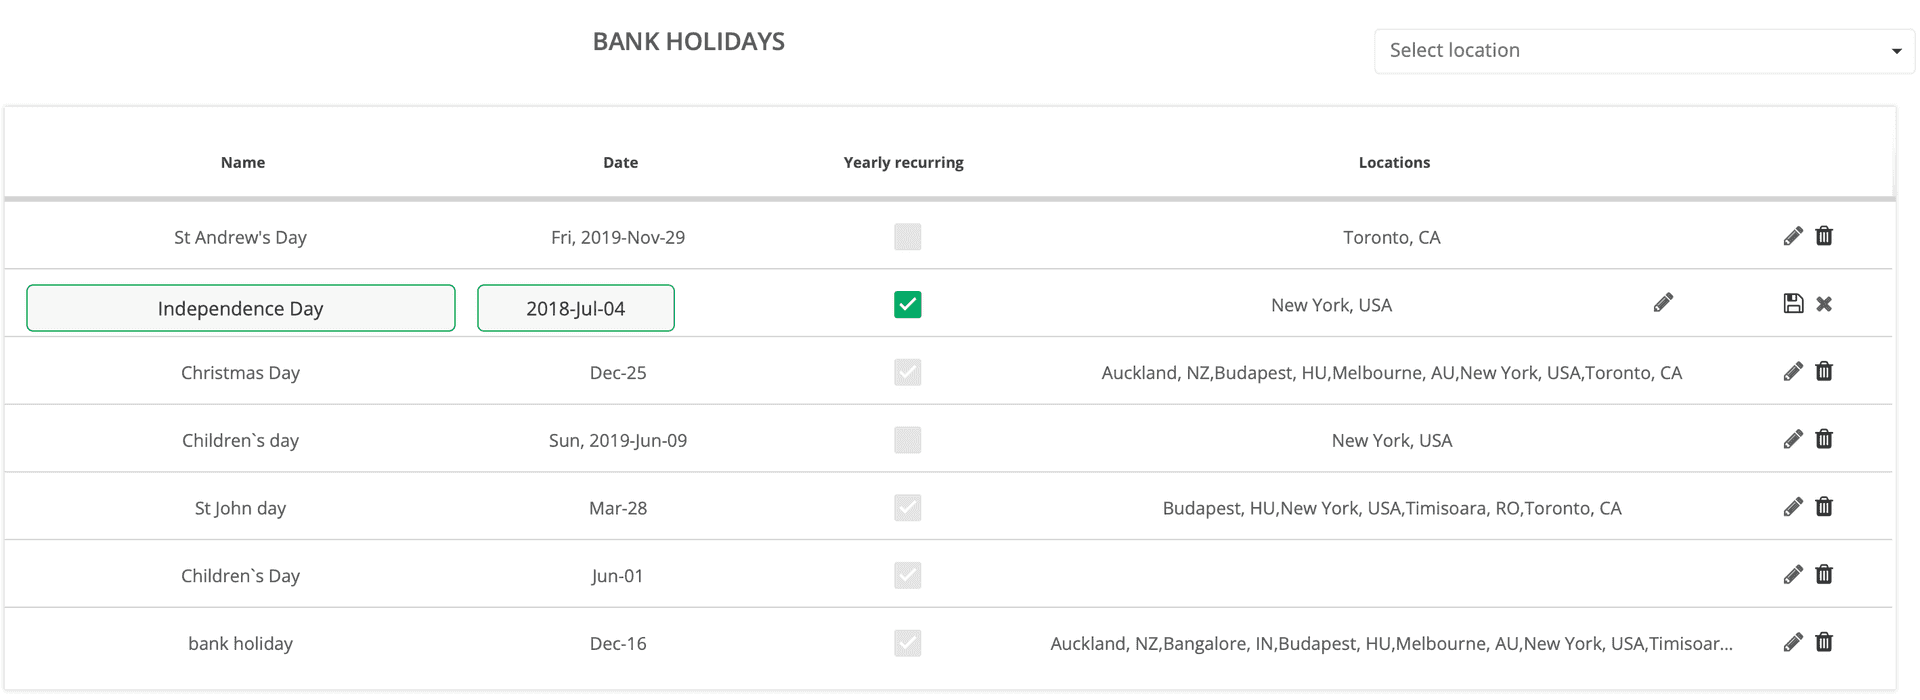 Check the yearly recurring box for eack bank holiday.